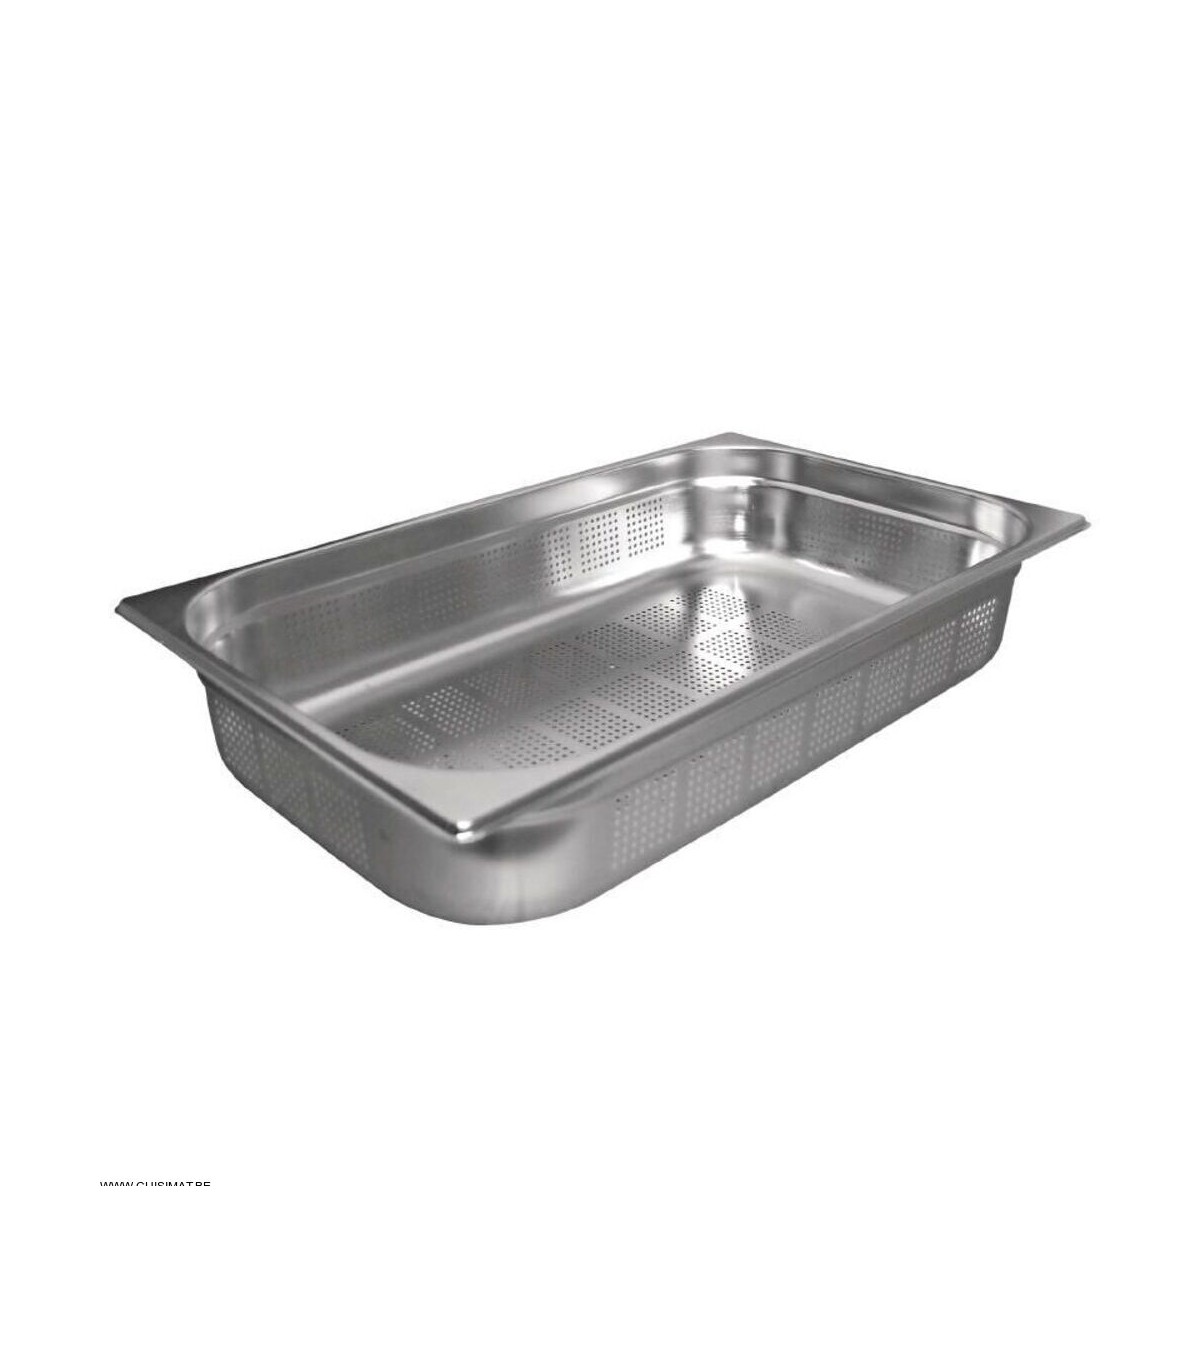 GN 1/1 PERFORE (325 * 530MM) 200 MM  VOGUE dans BACS GASTRONORM ANTI-ADHESIF